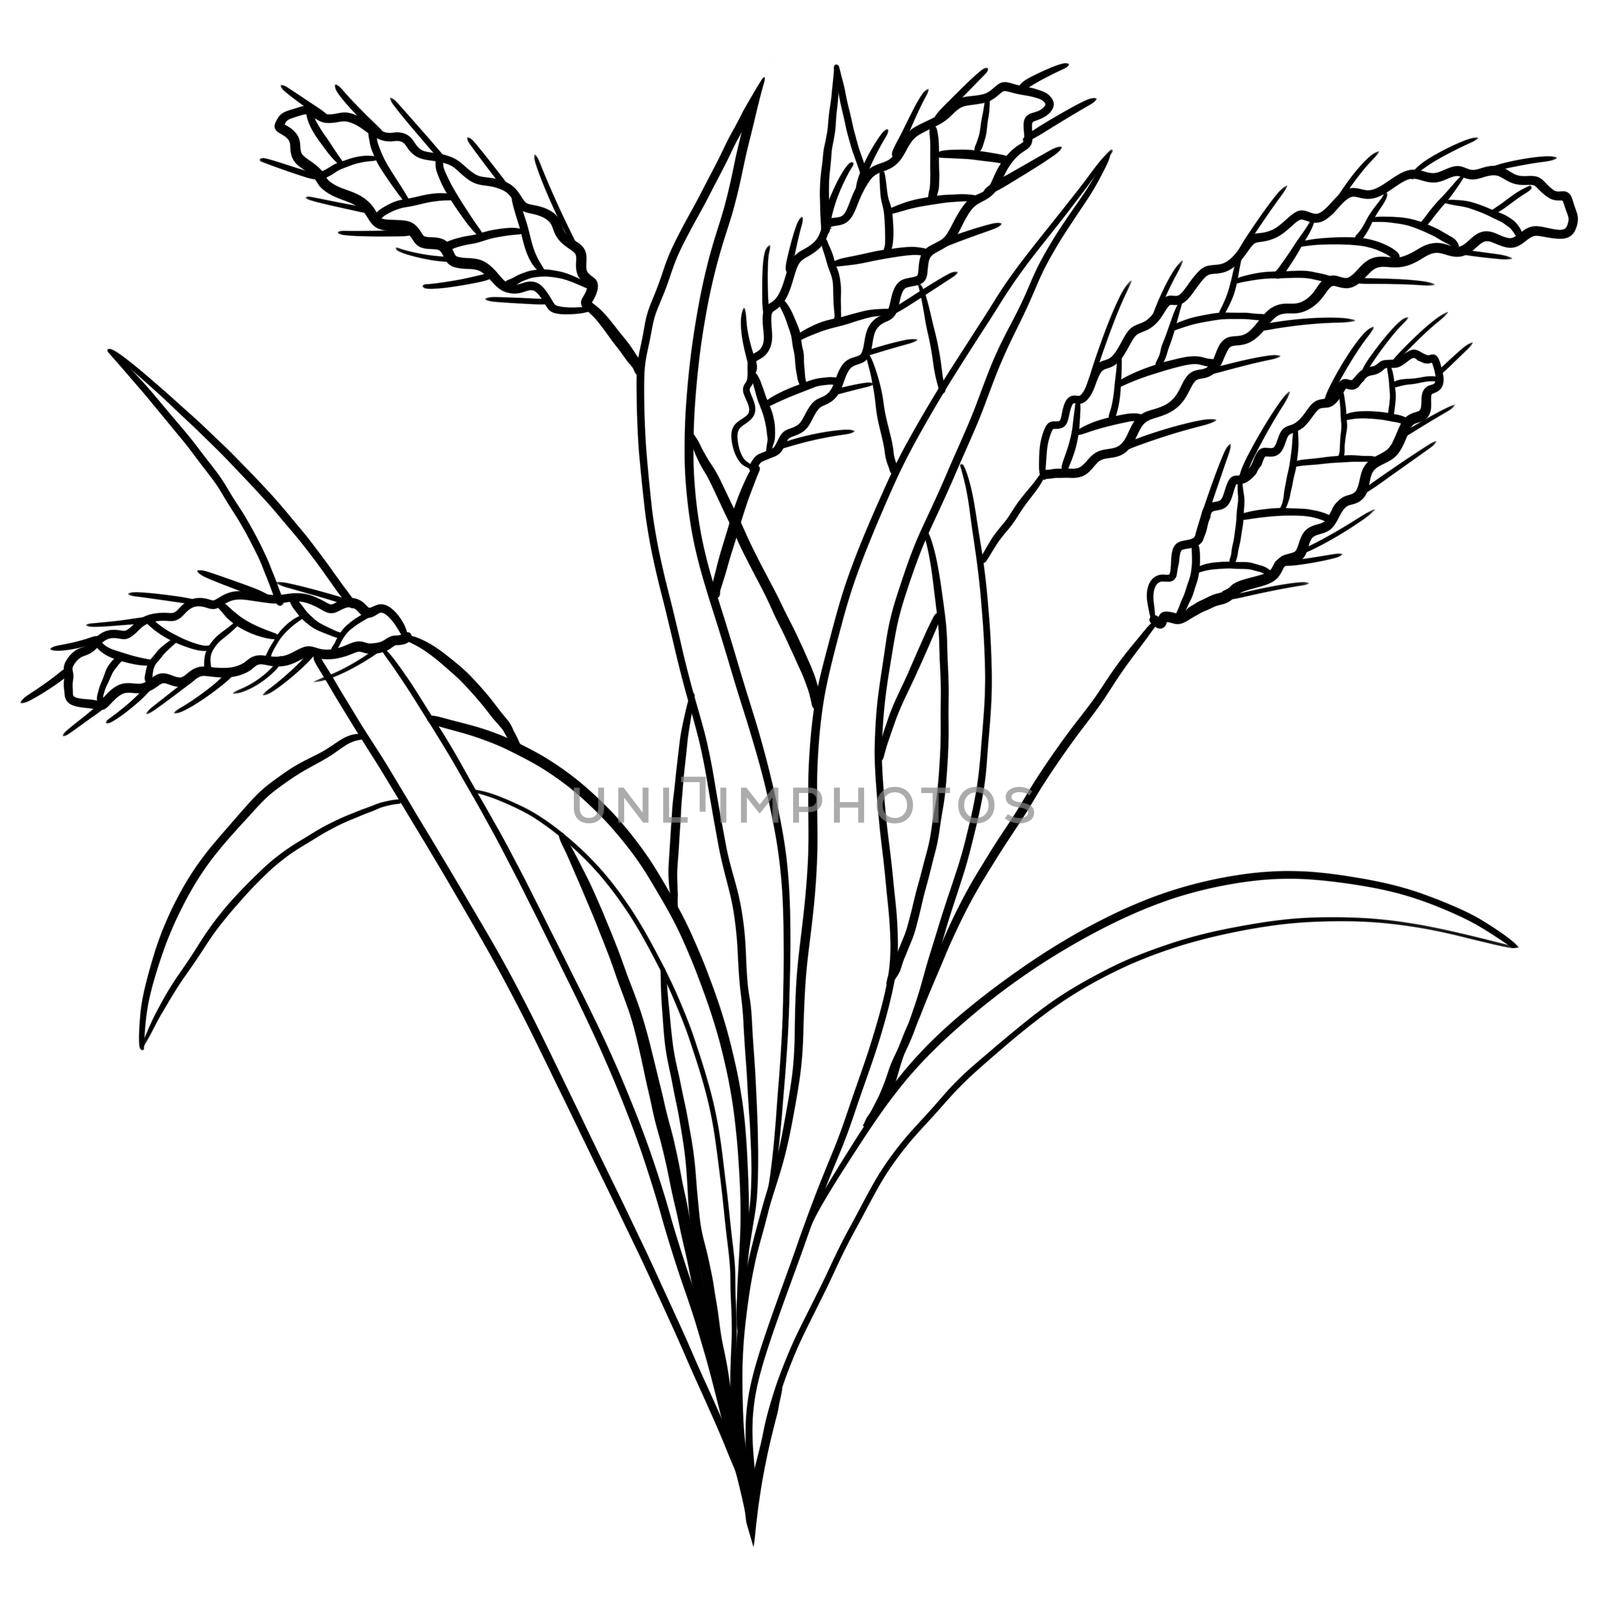 Wheat bread harvest, baking bakery concept. Floral illustration with long leaves in black line simple minimalist style. Nature plant herb print graphic ink botany. by Lagmar